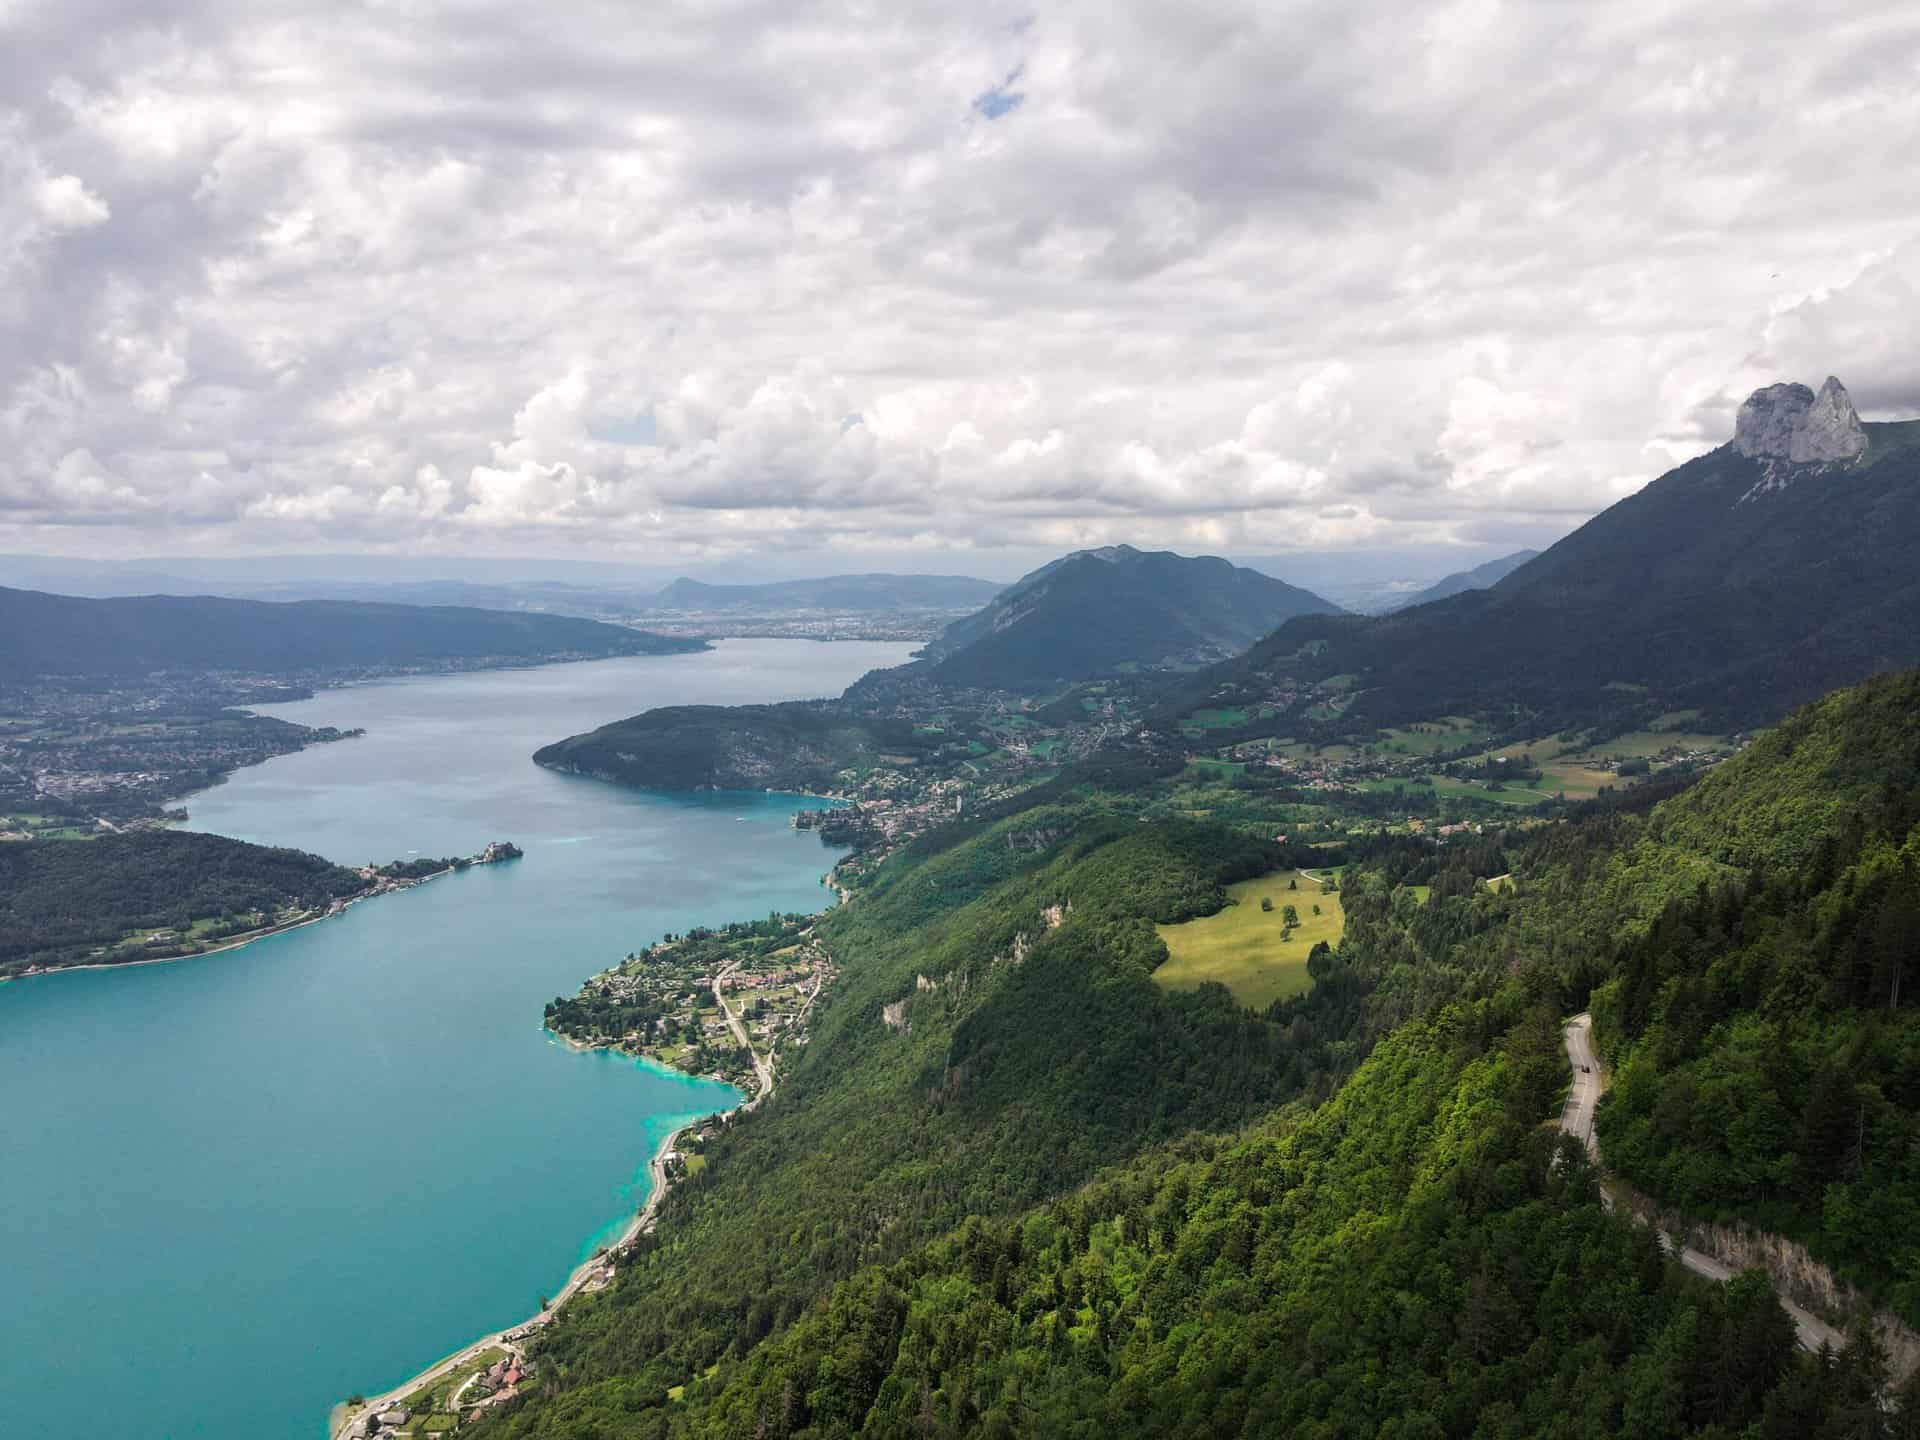 A view of Lake Annecy and the mountains that surround it